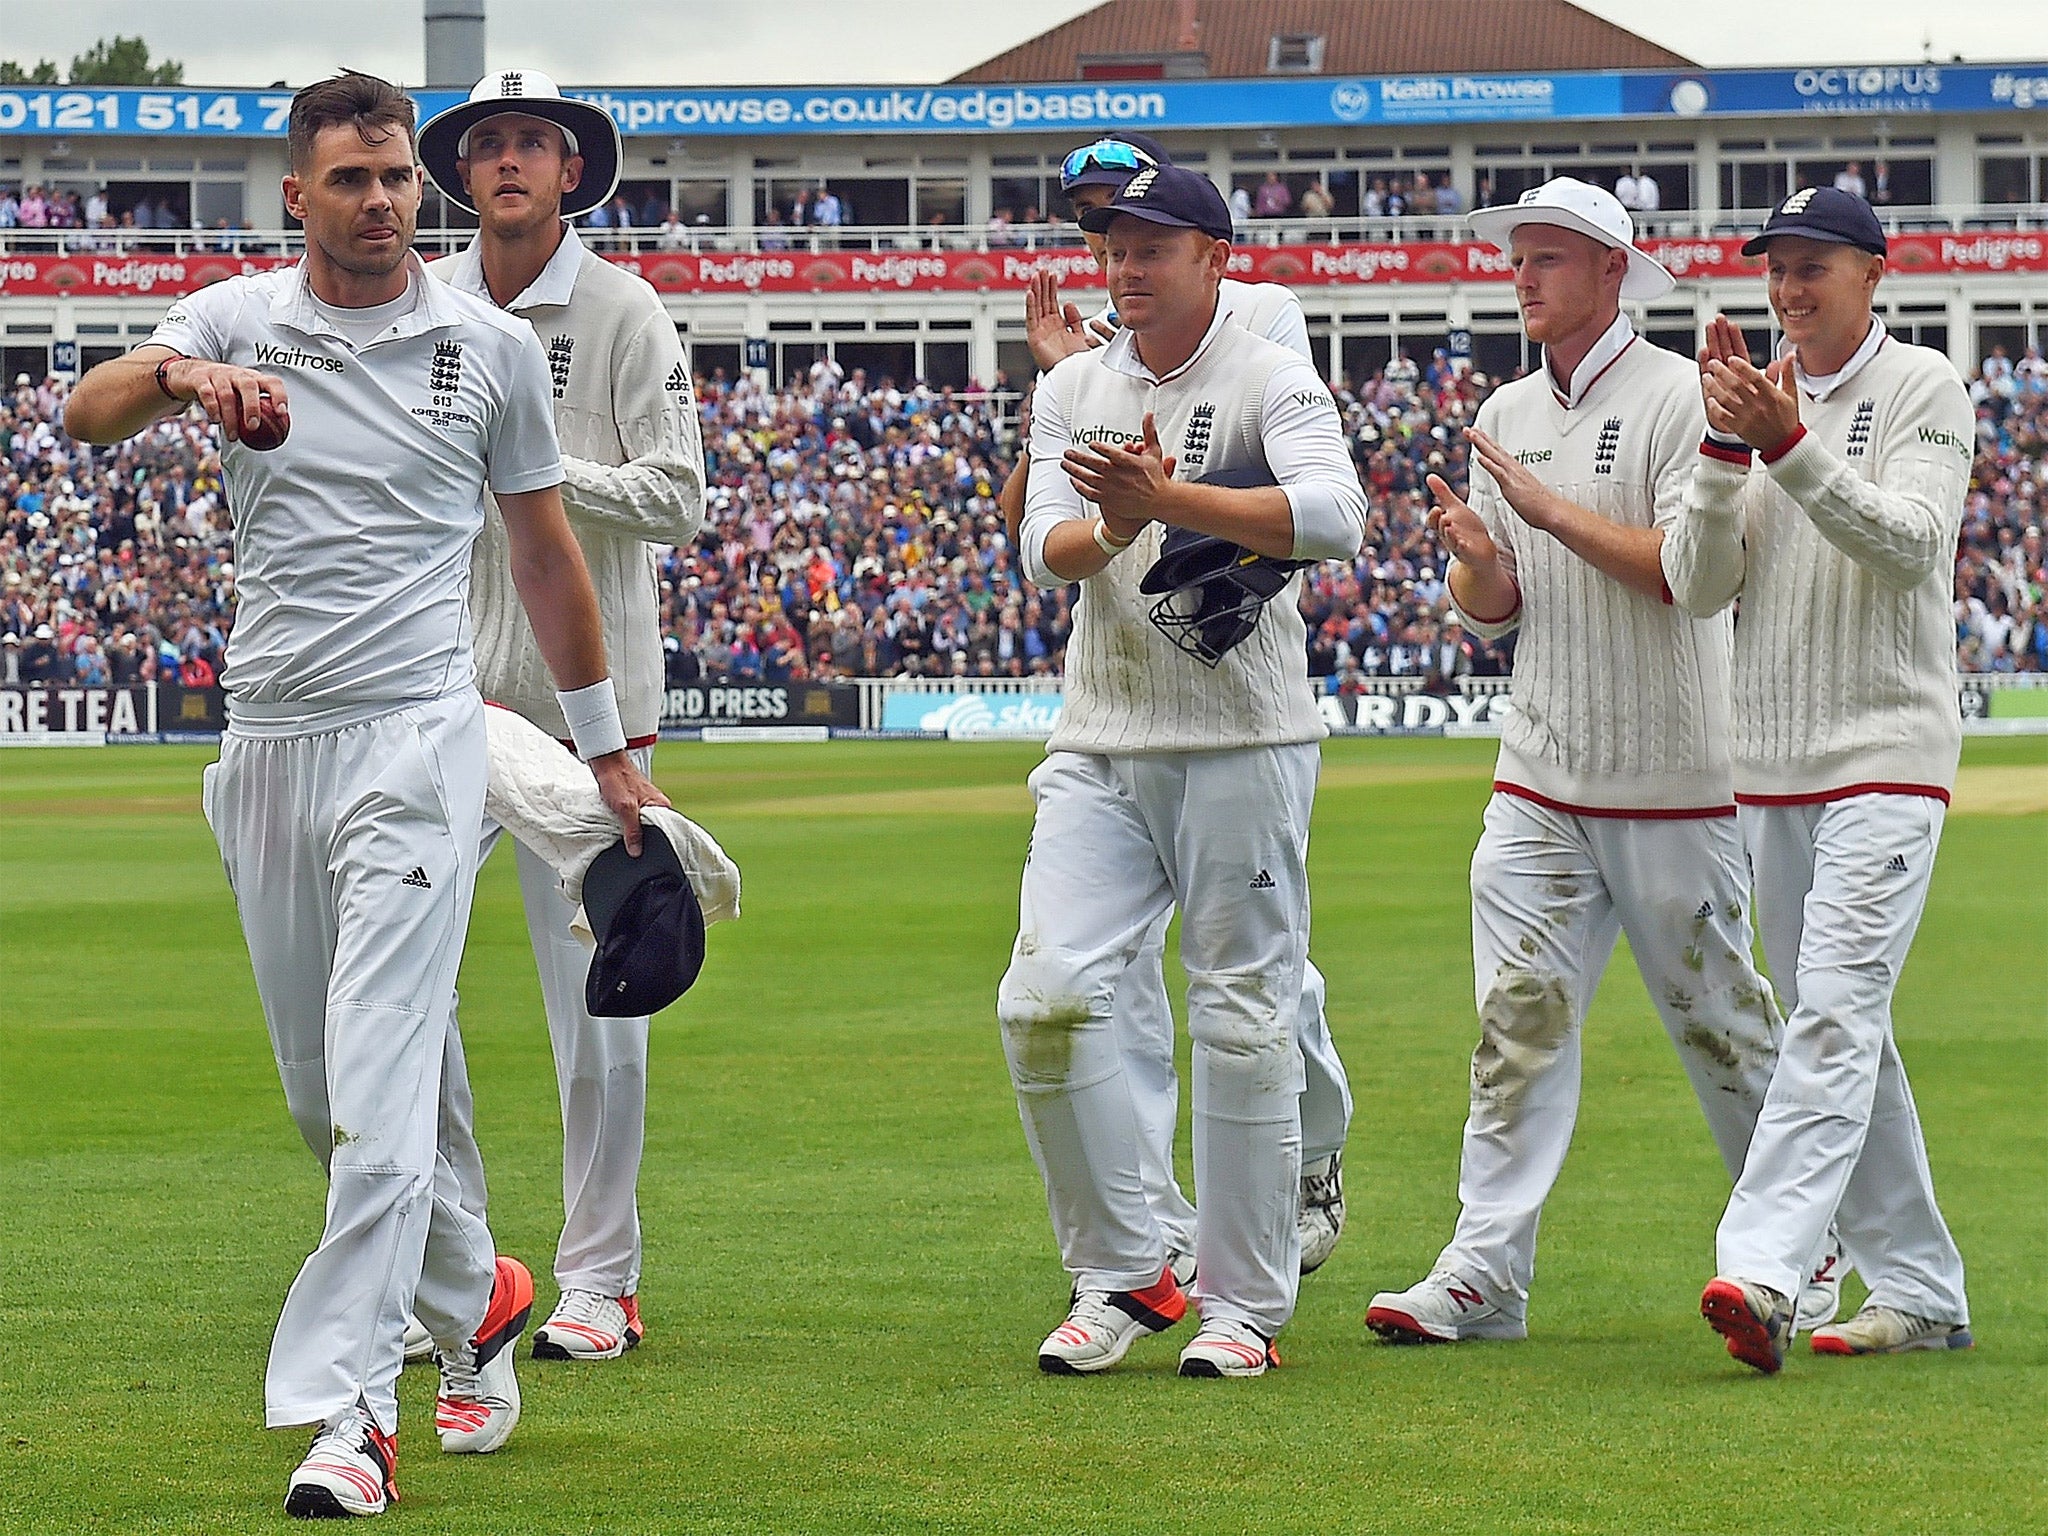 Jimmy Anderson leads England off after taking 6 for 47